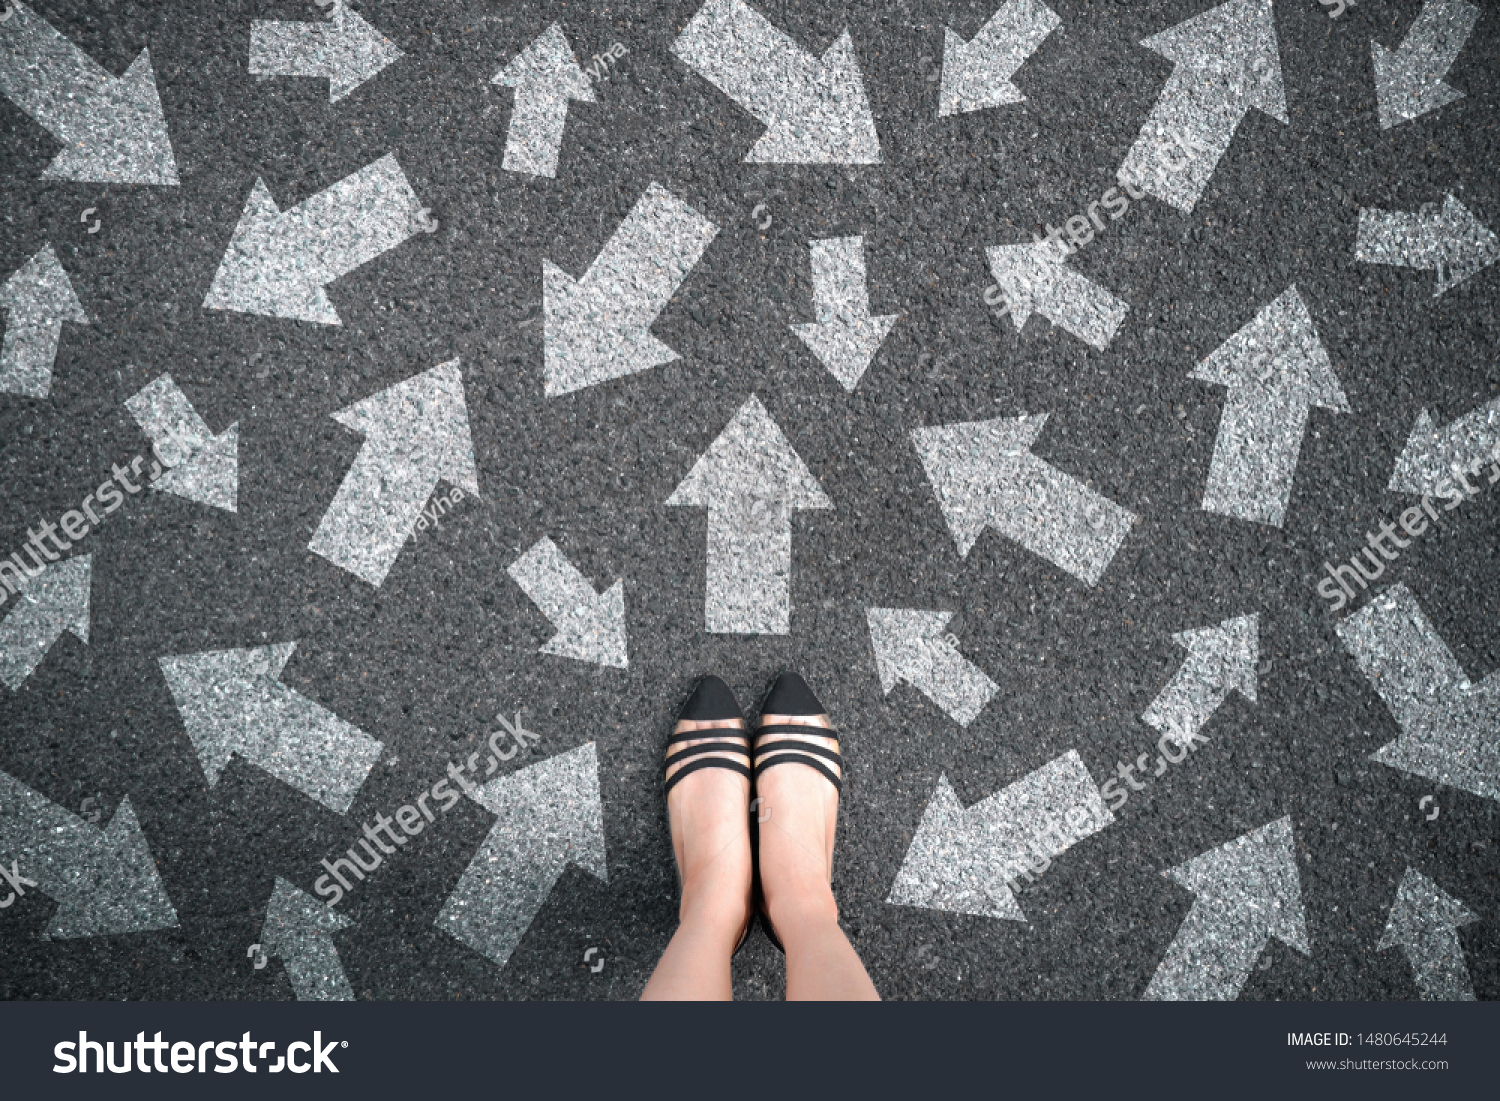 Feet and arrows on road background. Woman standing with many direction sign arrow choices in different ways, left and forward. Taking decisions for the future female. Top view of selfie foot and shoe. #1480645244